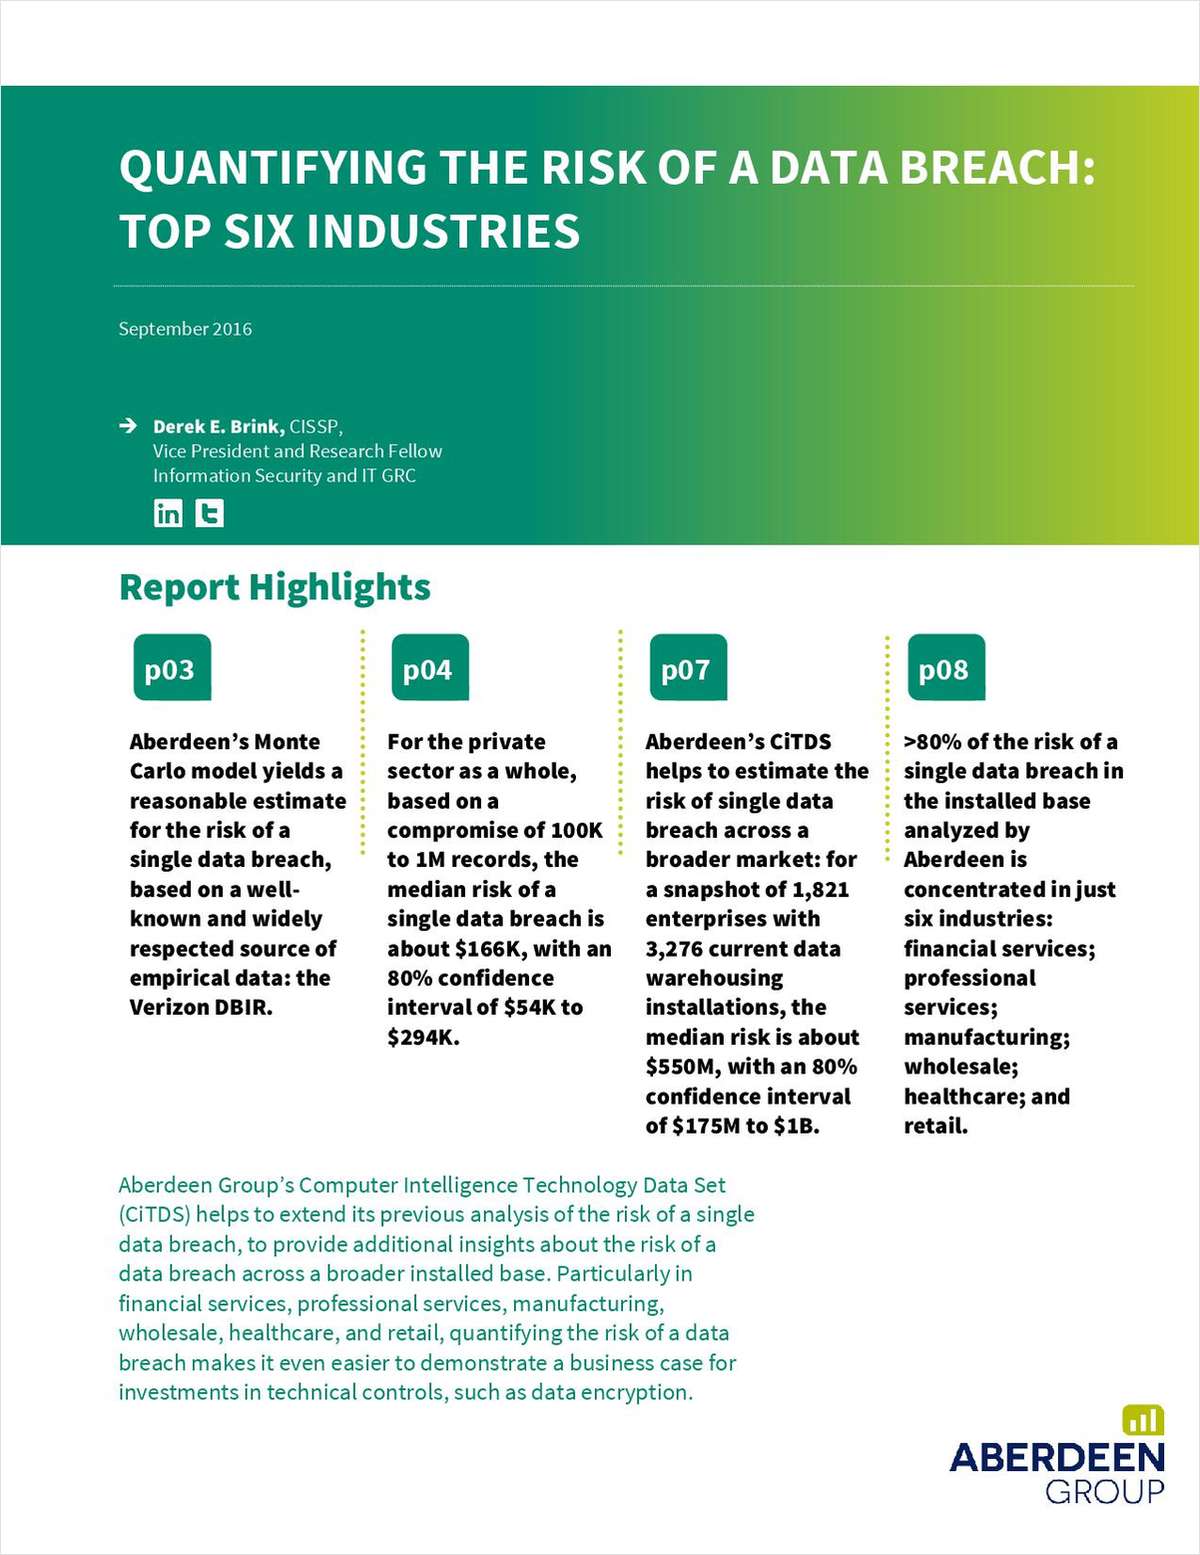 Quantifying the Risk of a Data Breach: Top Six Industries